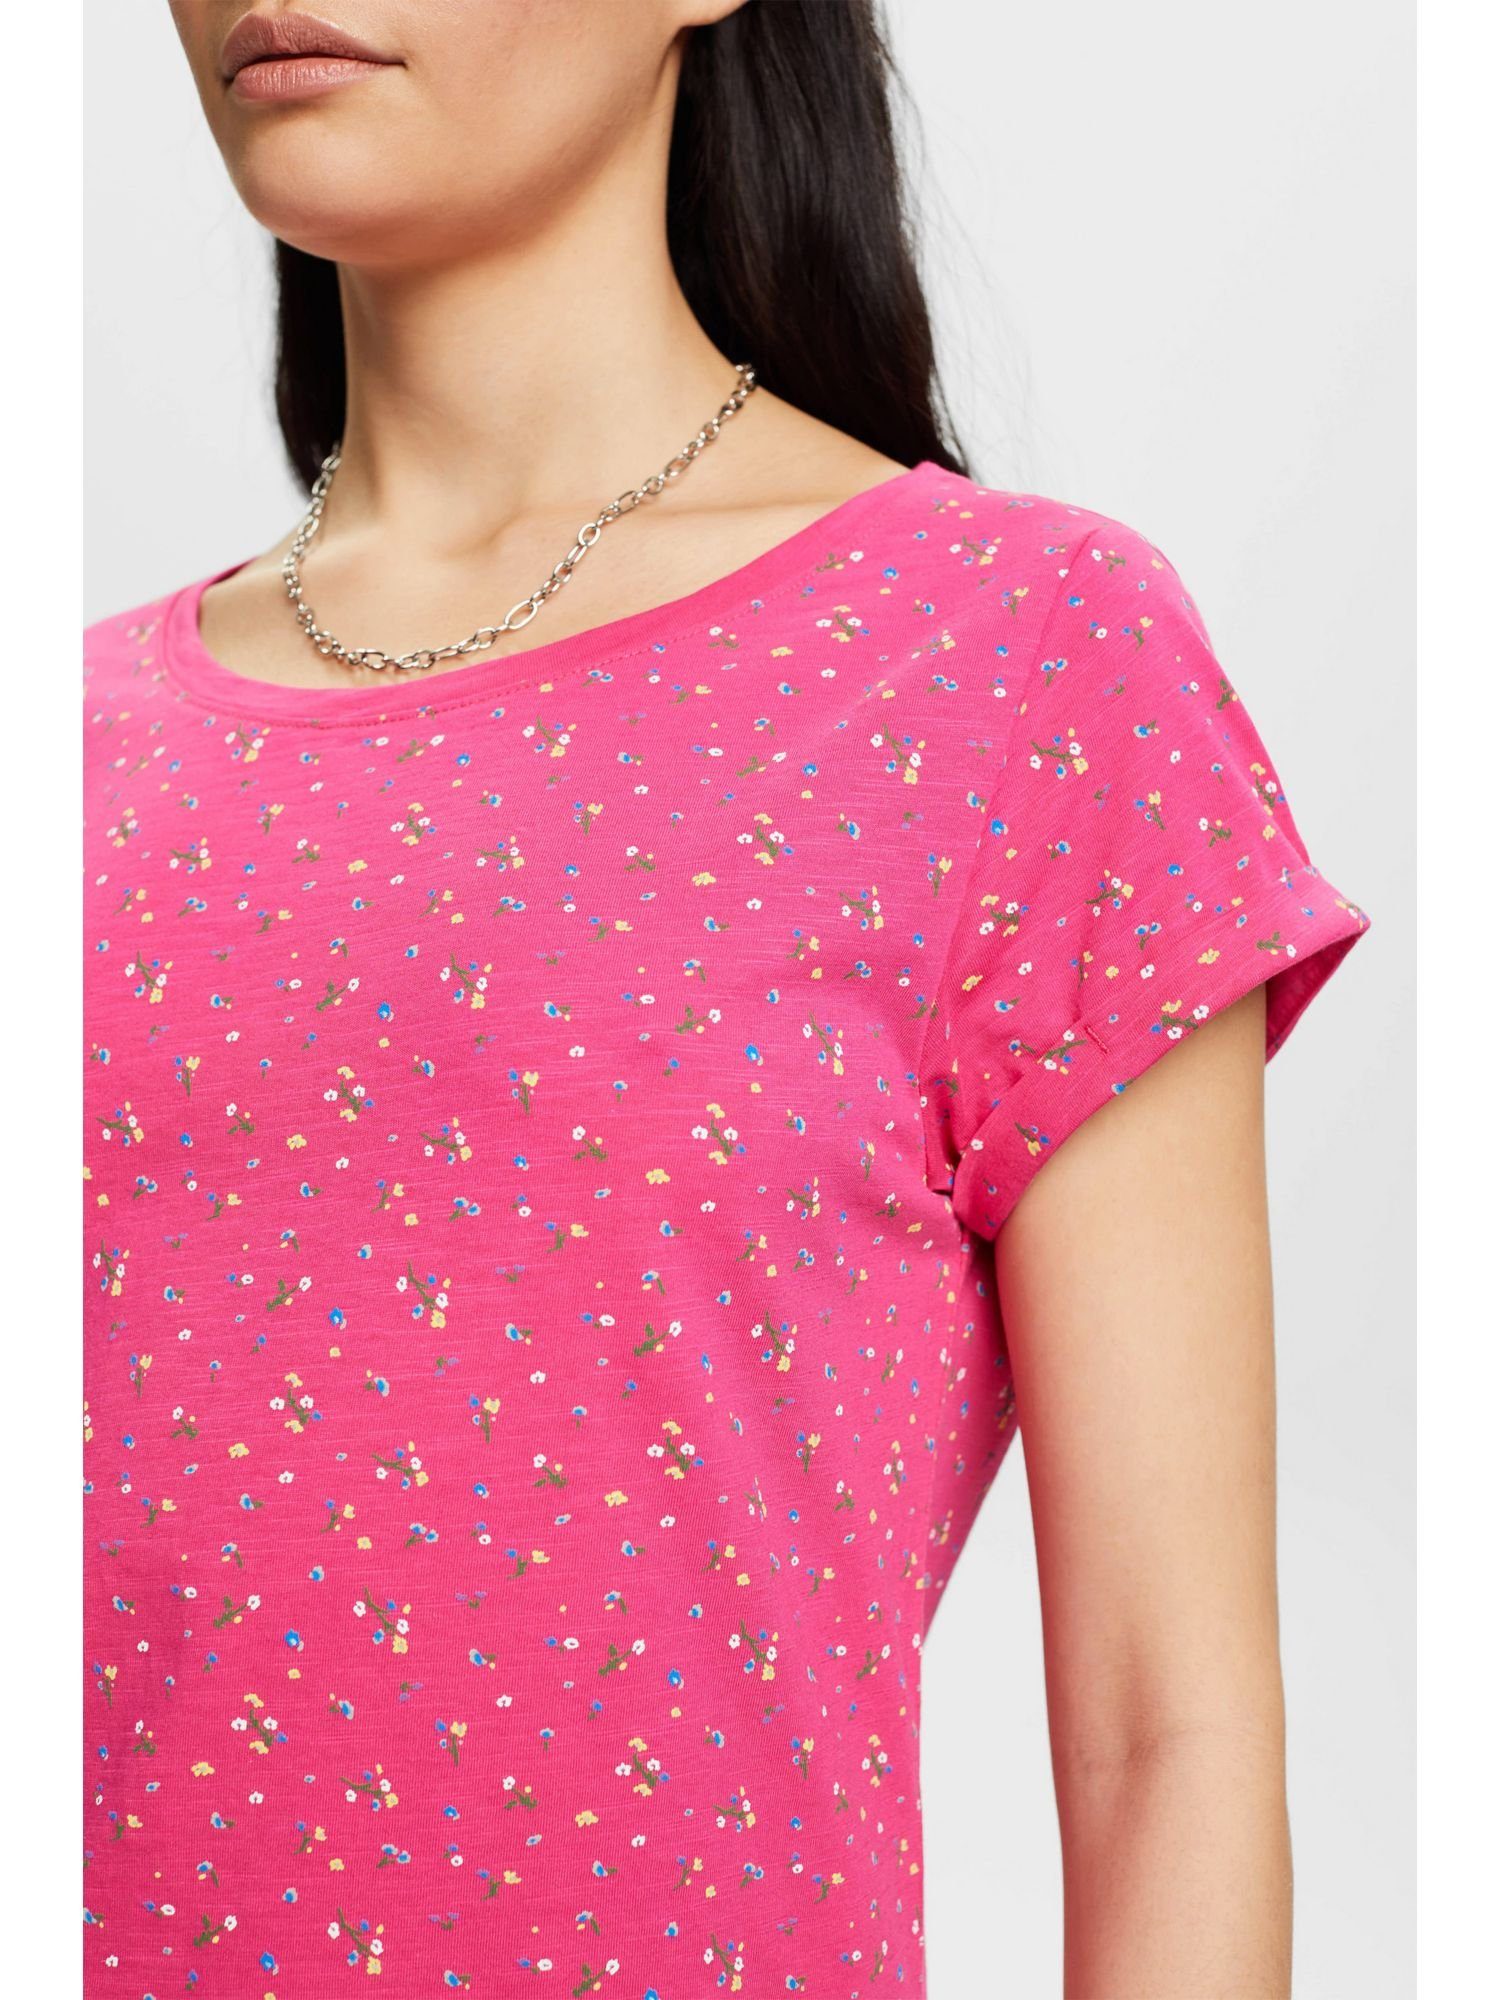 Esprit edc T-Shirt Allover-Muster T-Shirt (1-tlg) FUCHSIA PINK mit by